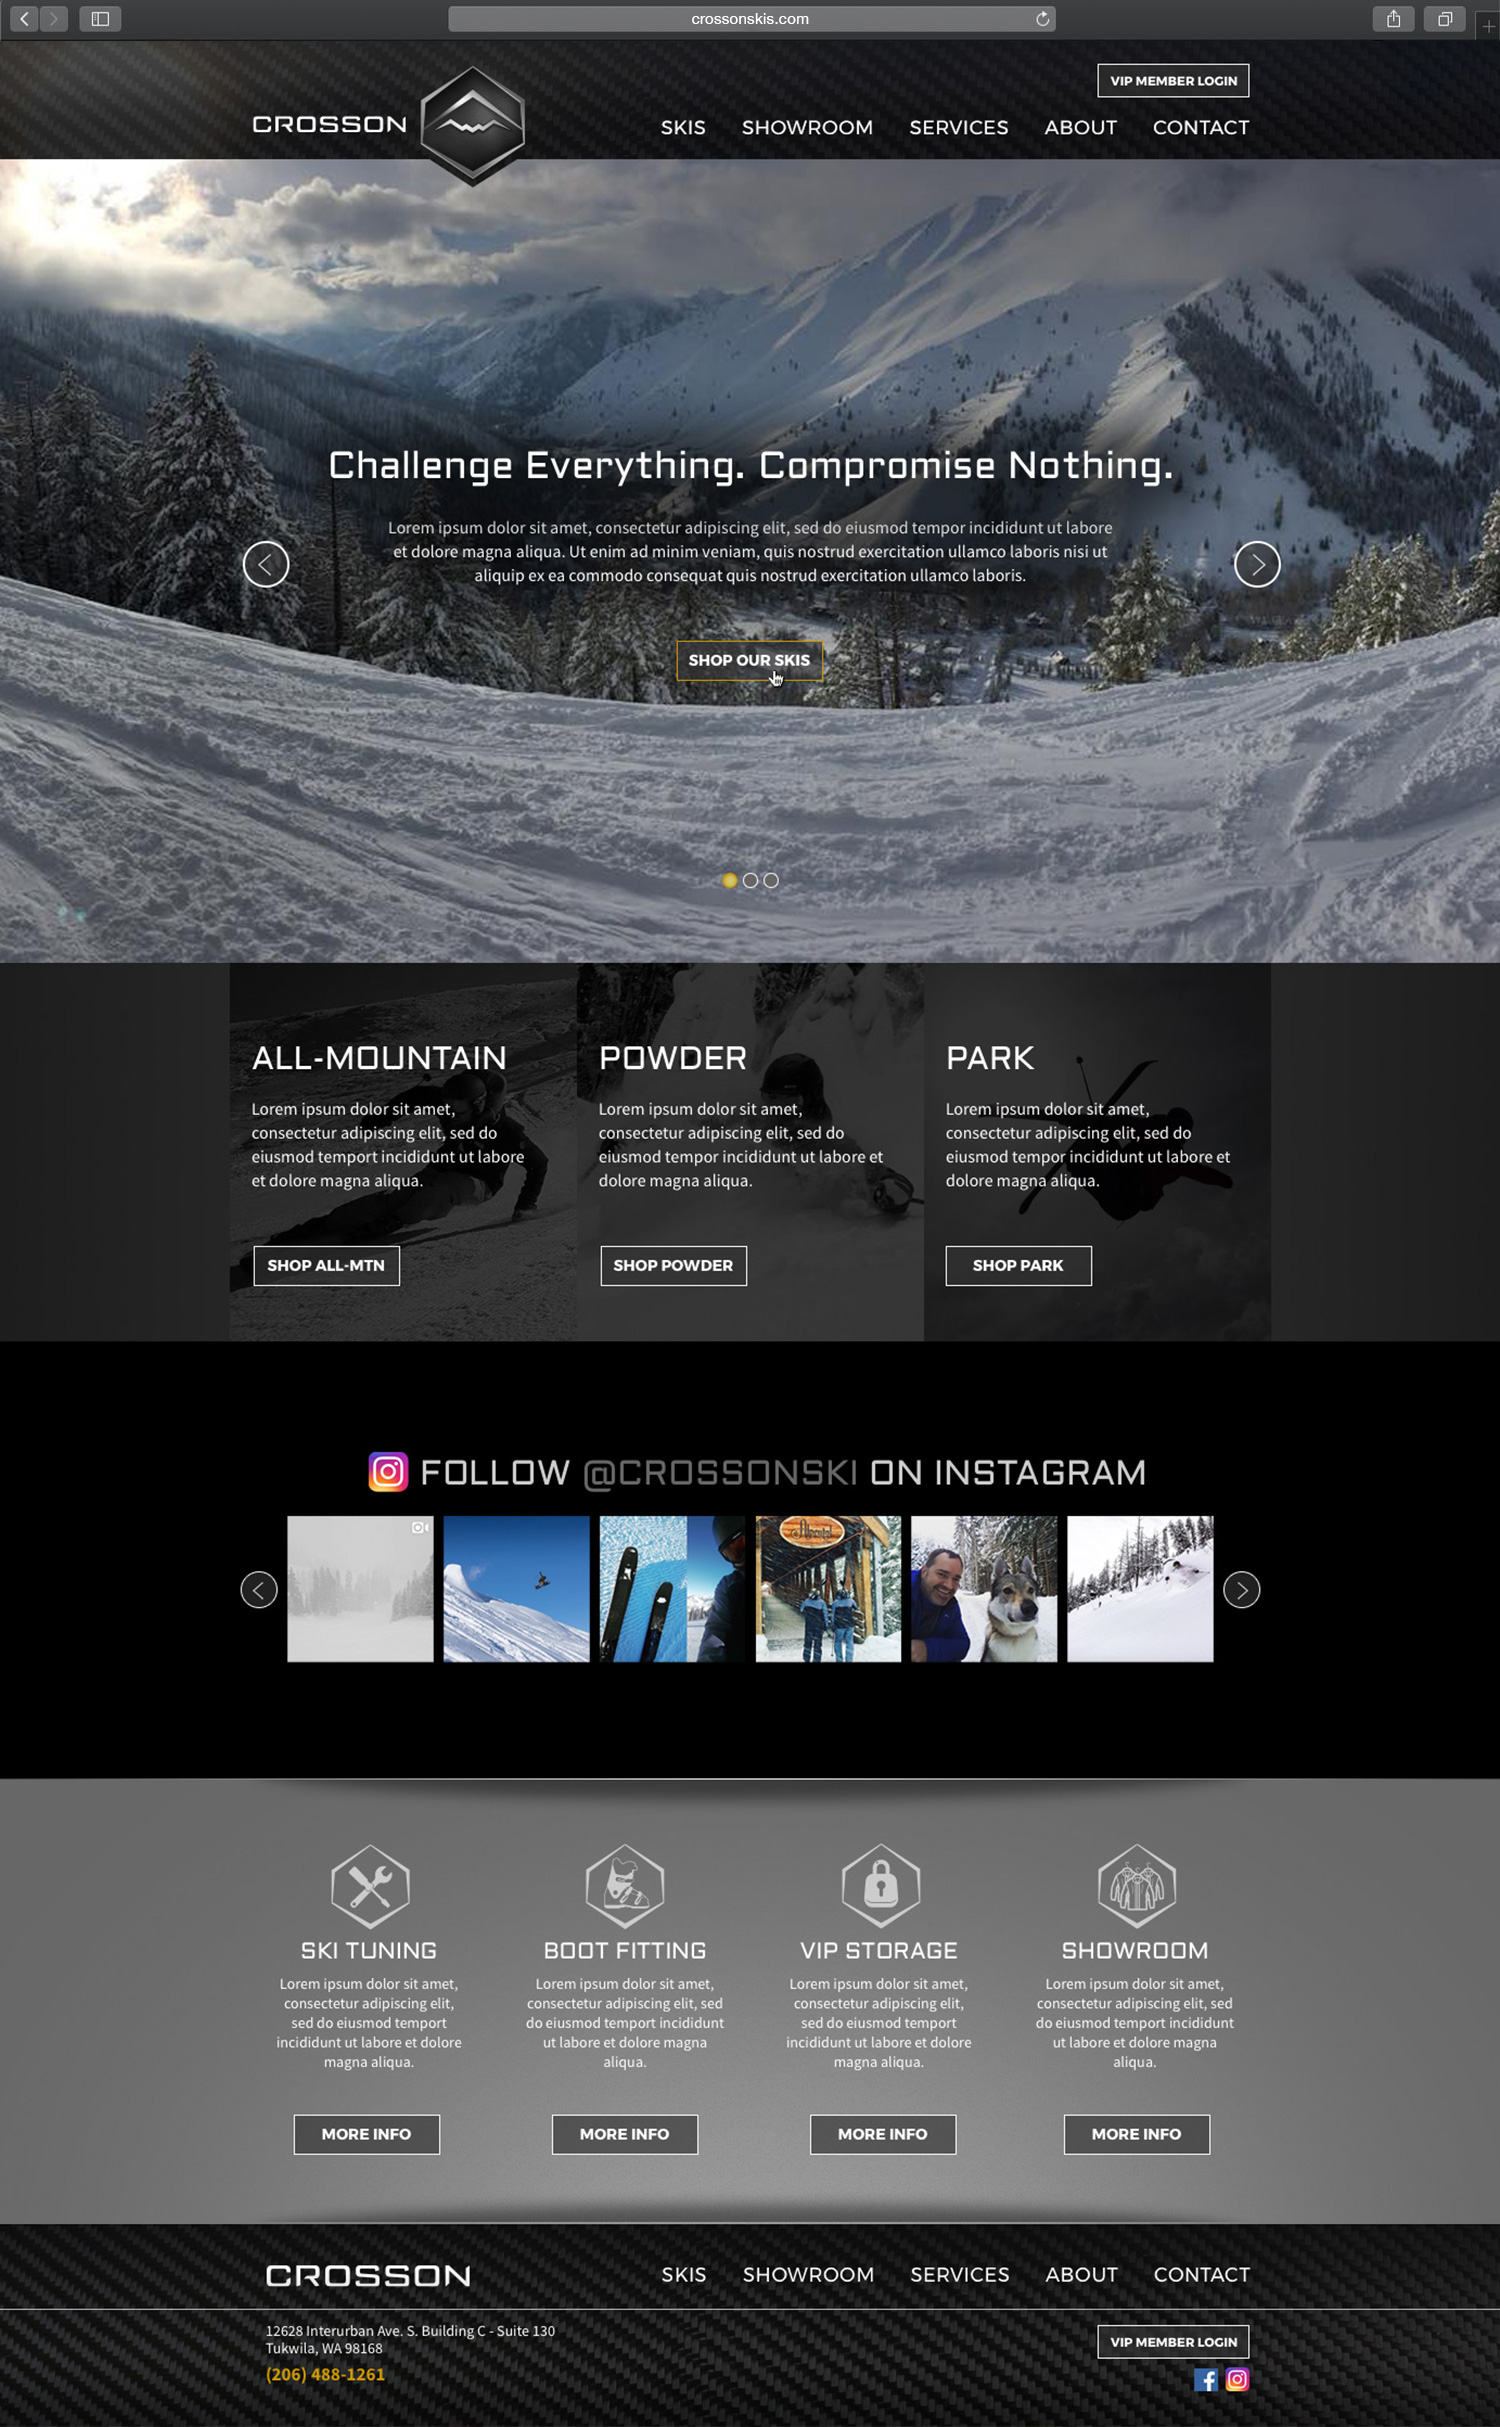 Website design and website development for Crosson - homepage view.